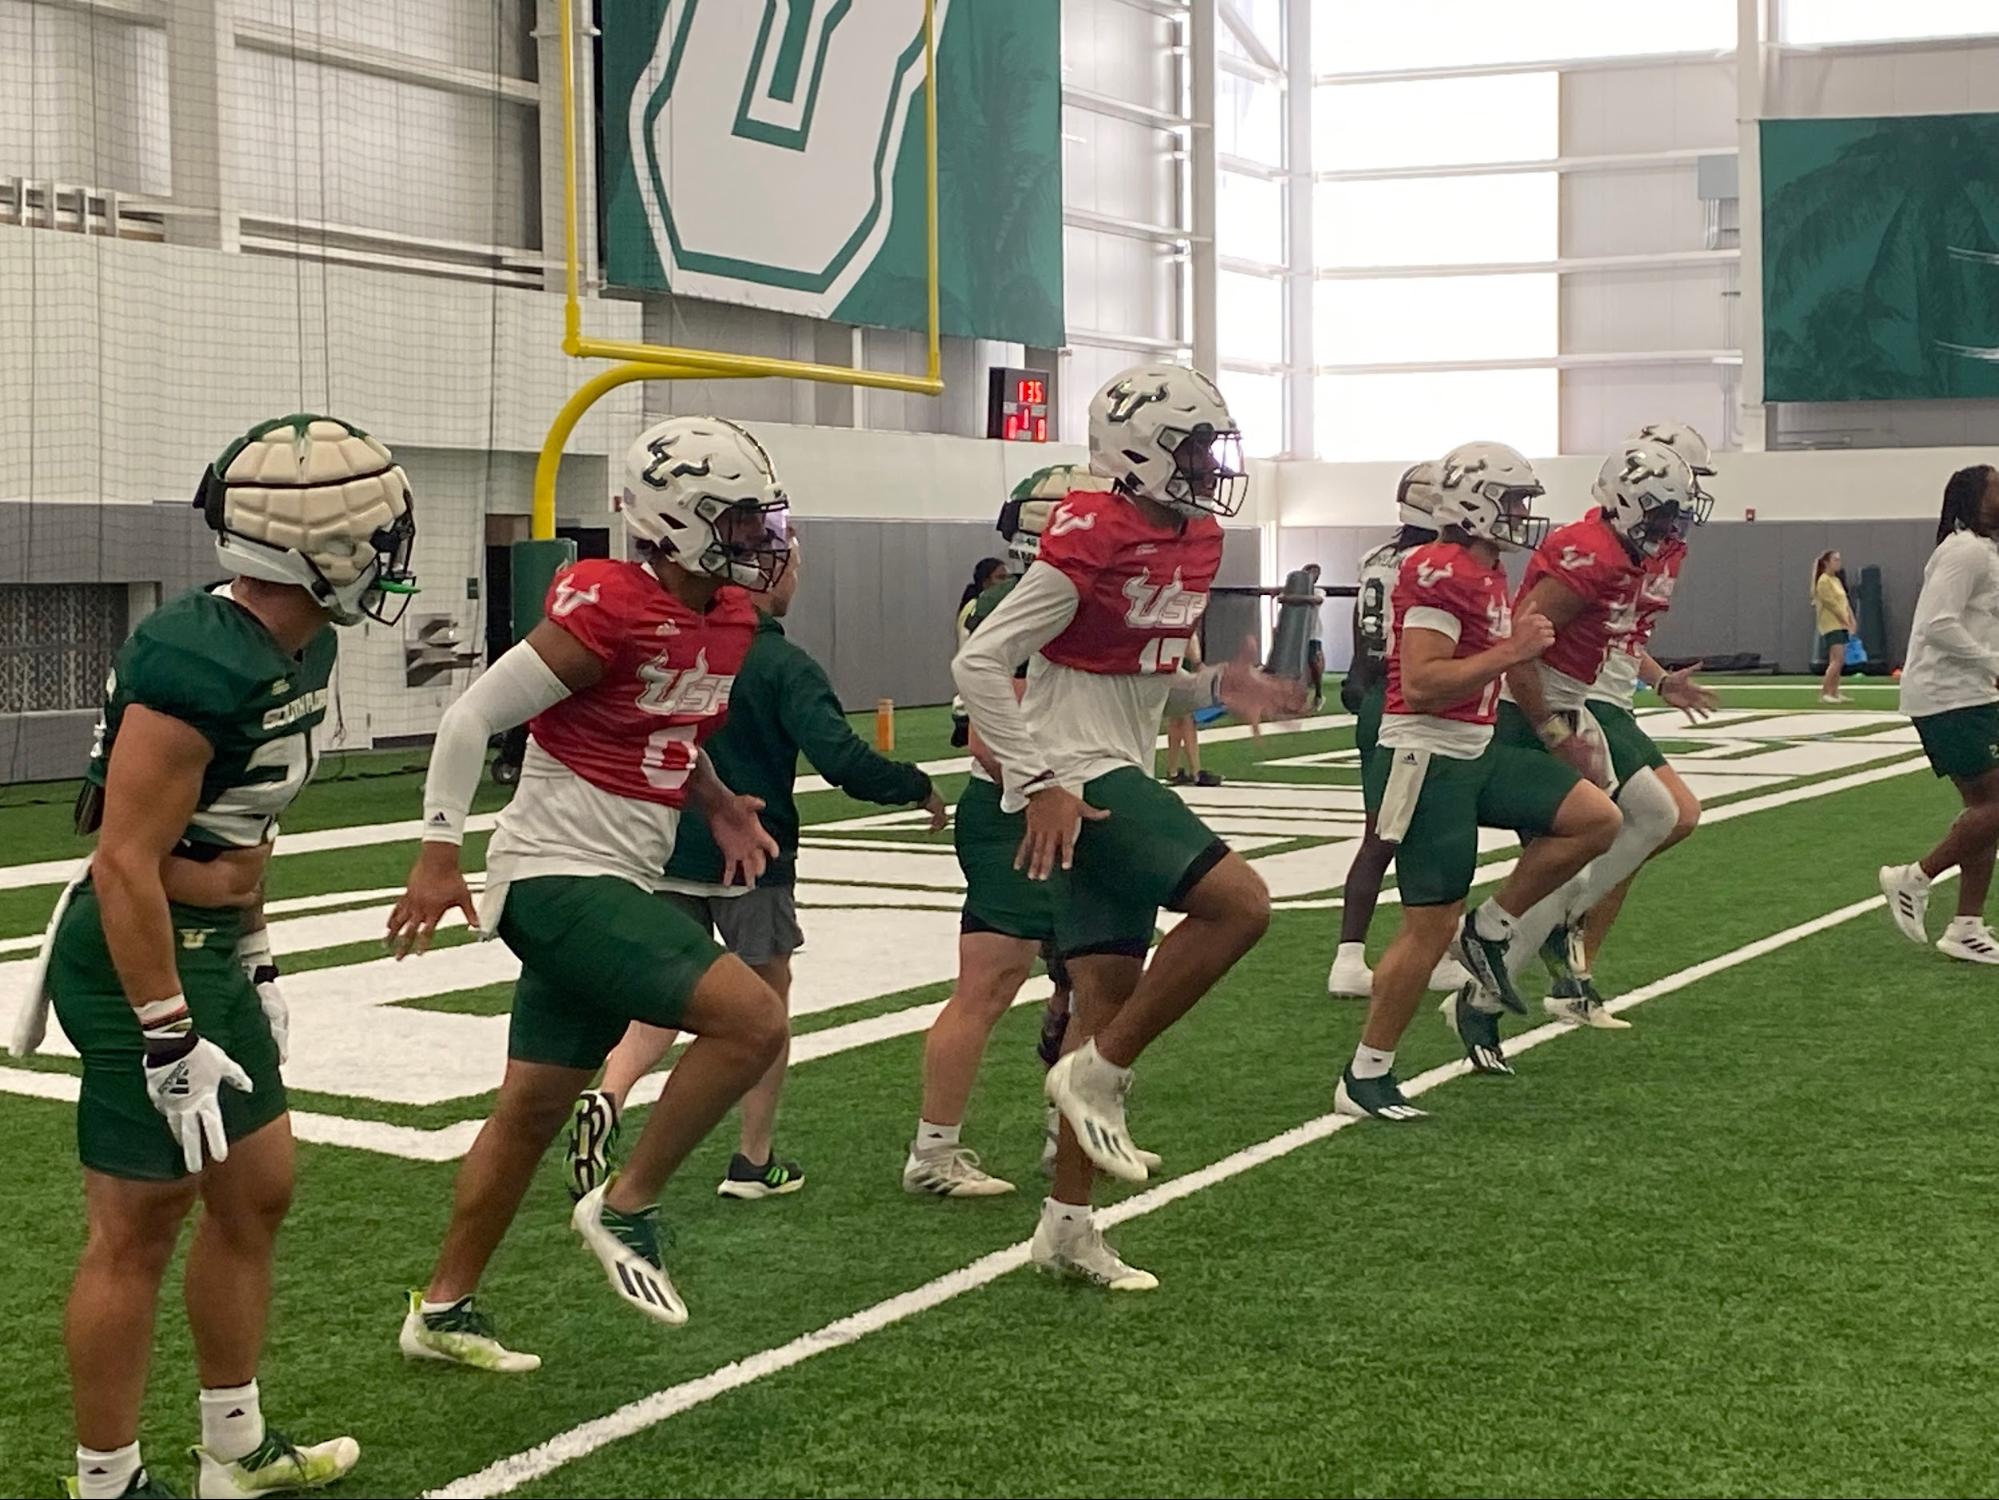 USF to continue starting quarterback search after spring ball – The Oracle